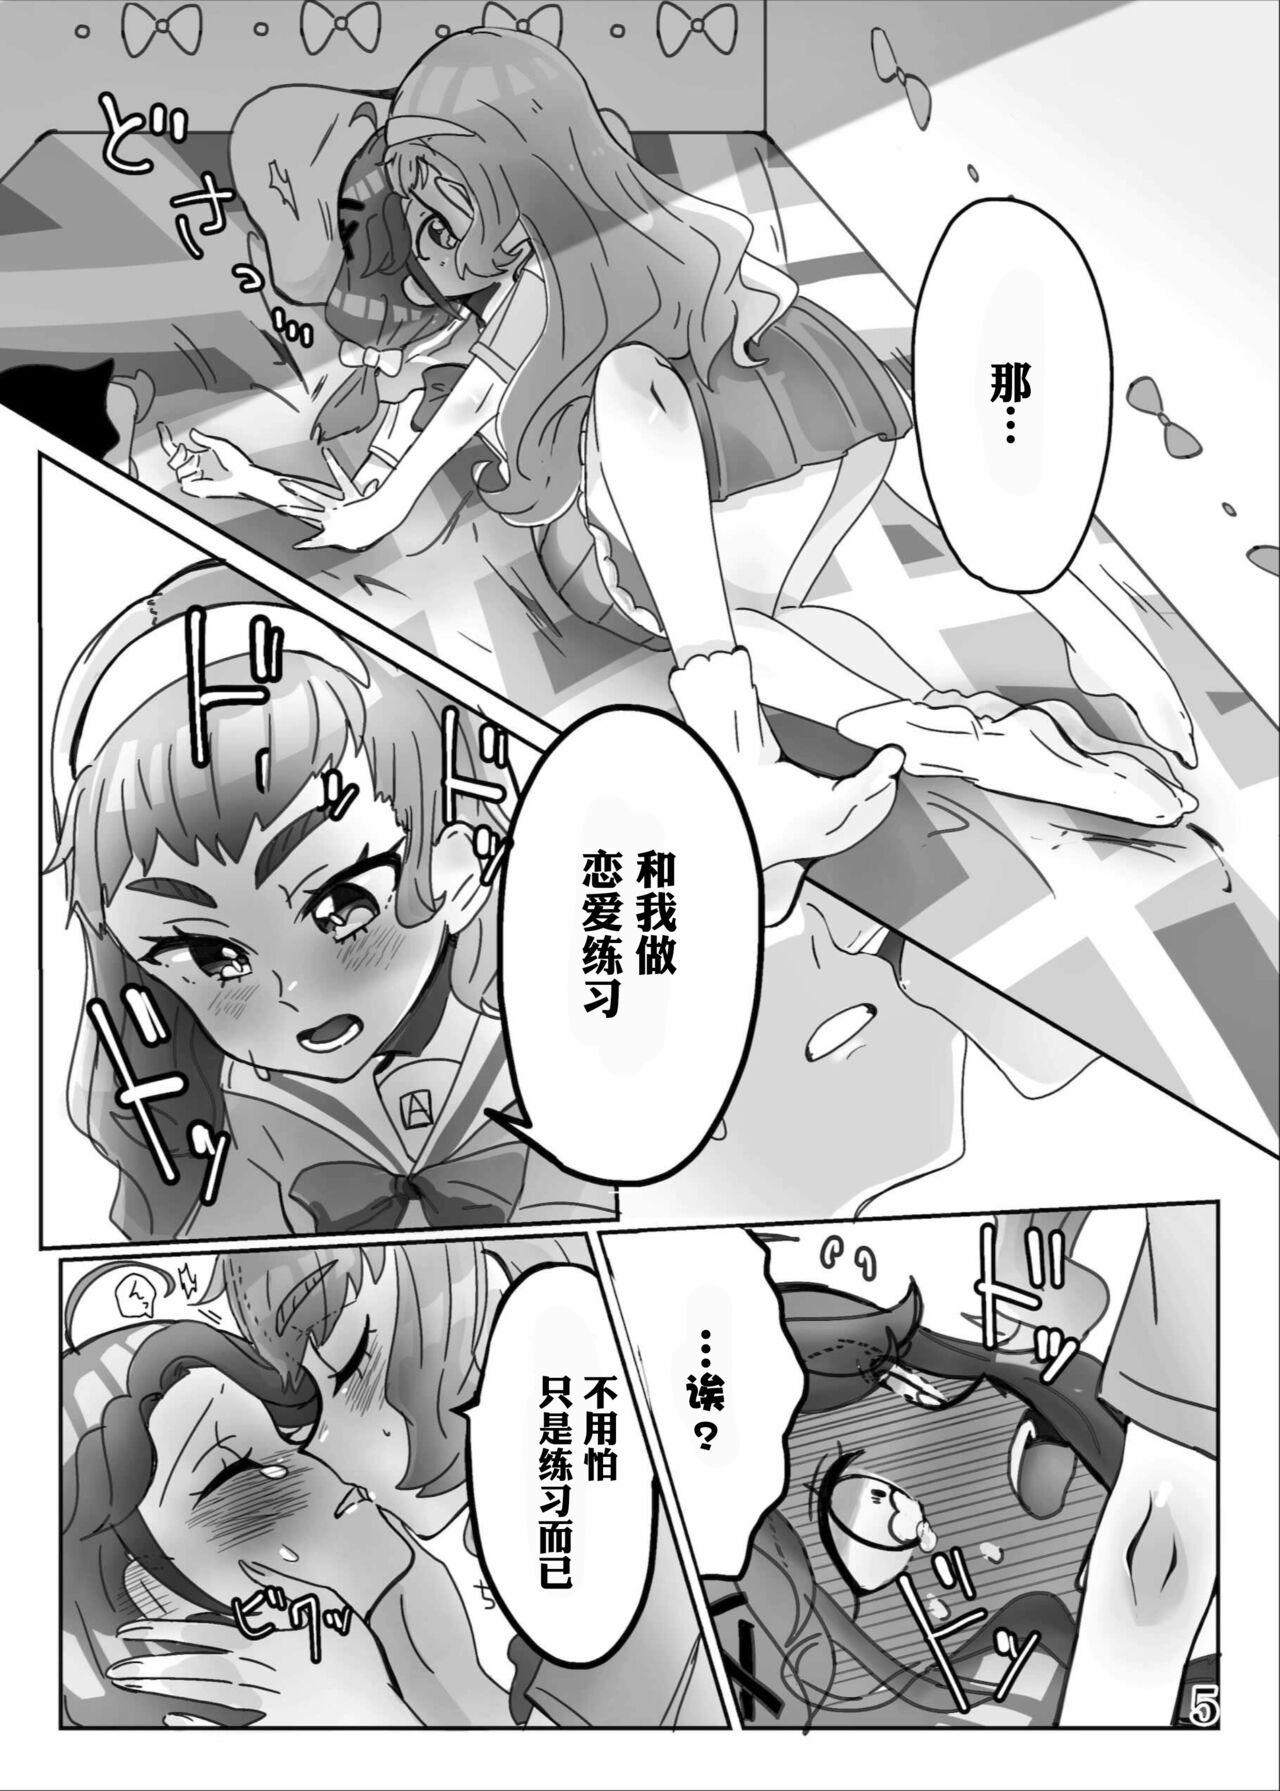 Wives yaritaigotone do my best - Pretty cure Tropical rouge precure Upskirt - Page 7